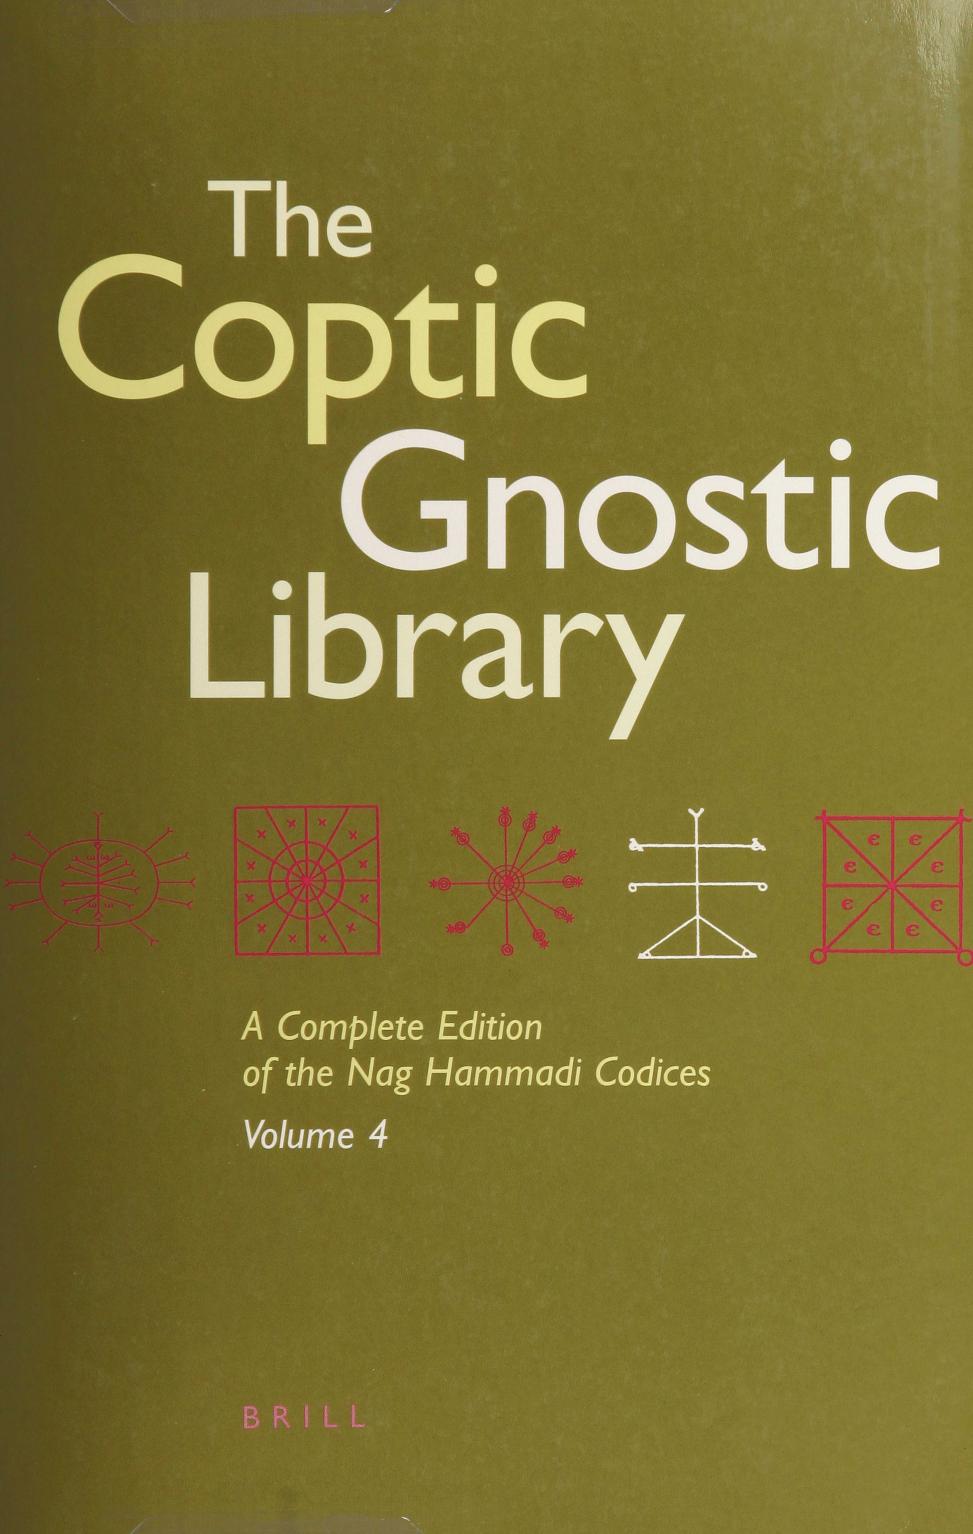 The Coptic Gnostic Library A Complete Edition of the Nag Hammadi Codices Volume 4